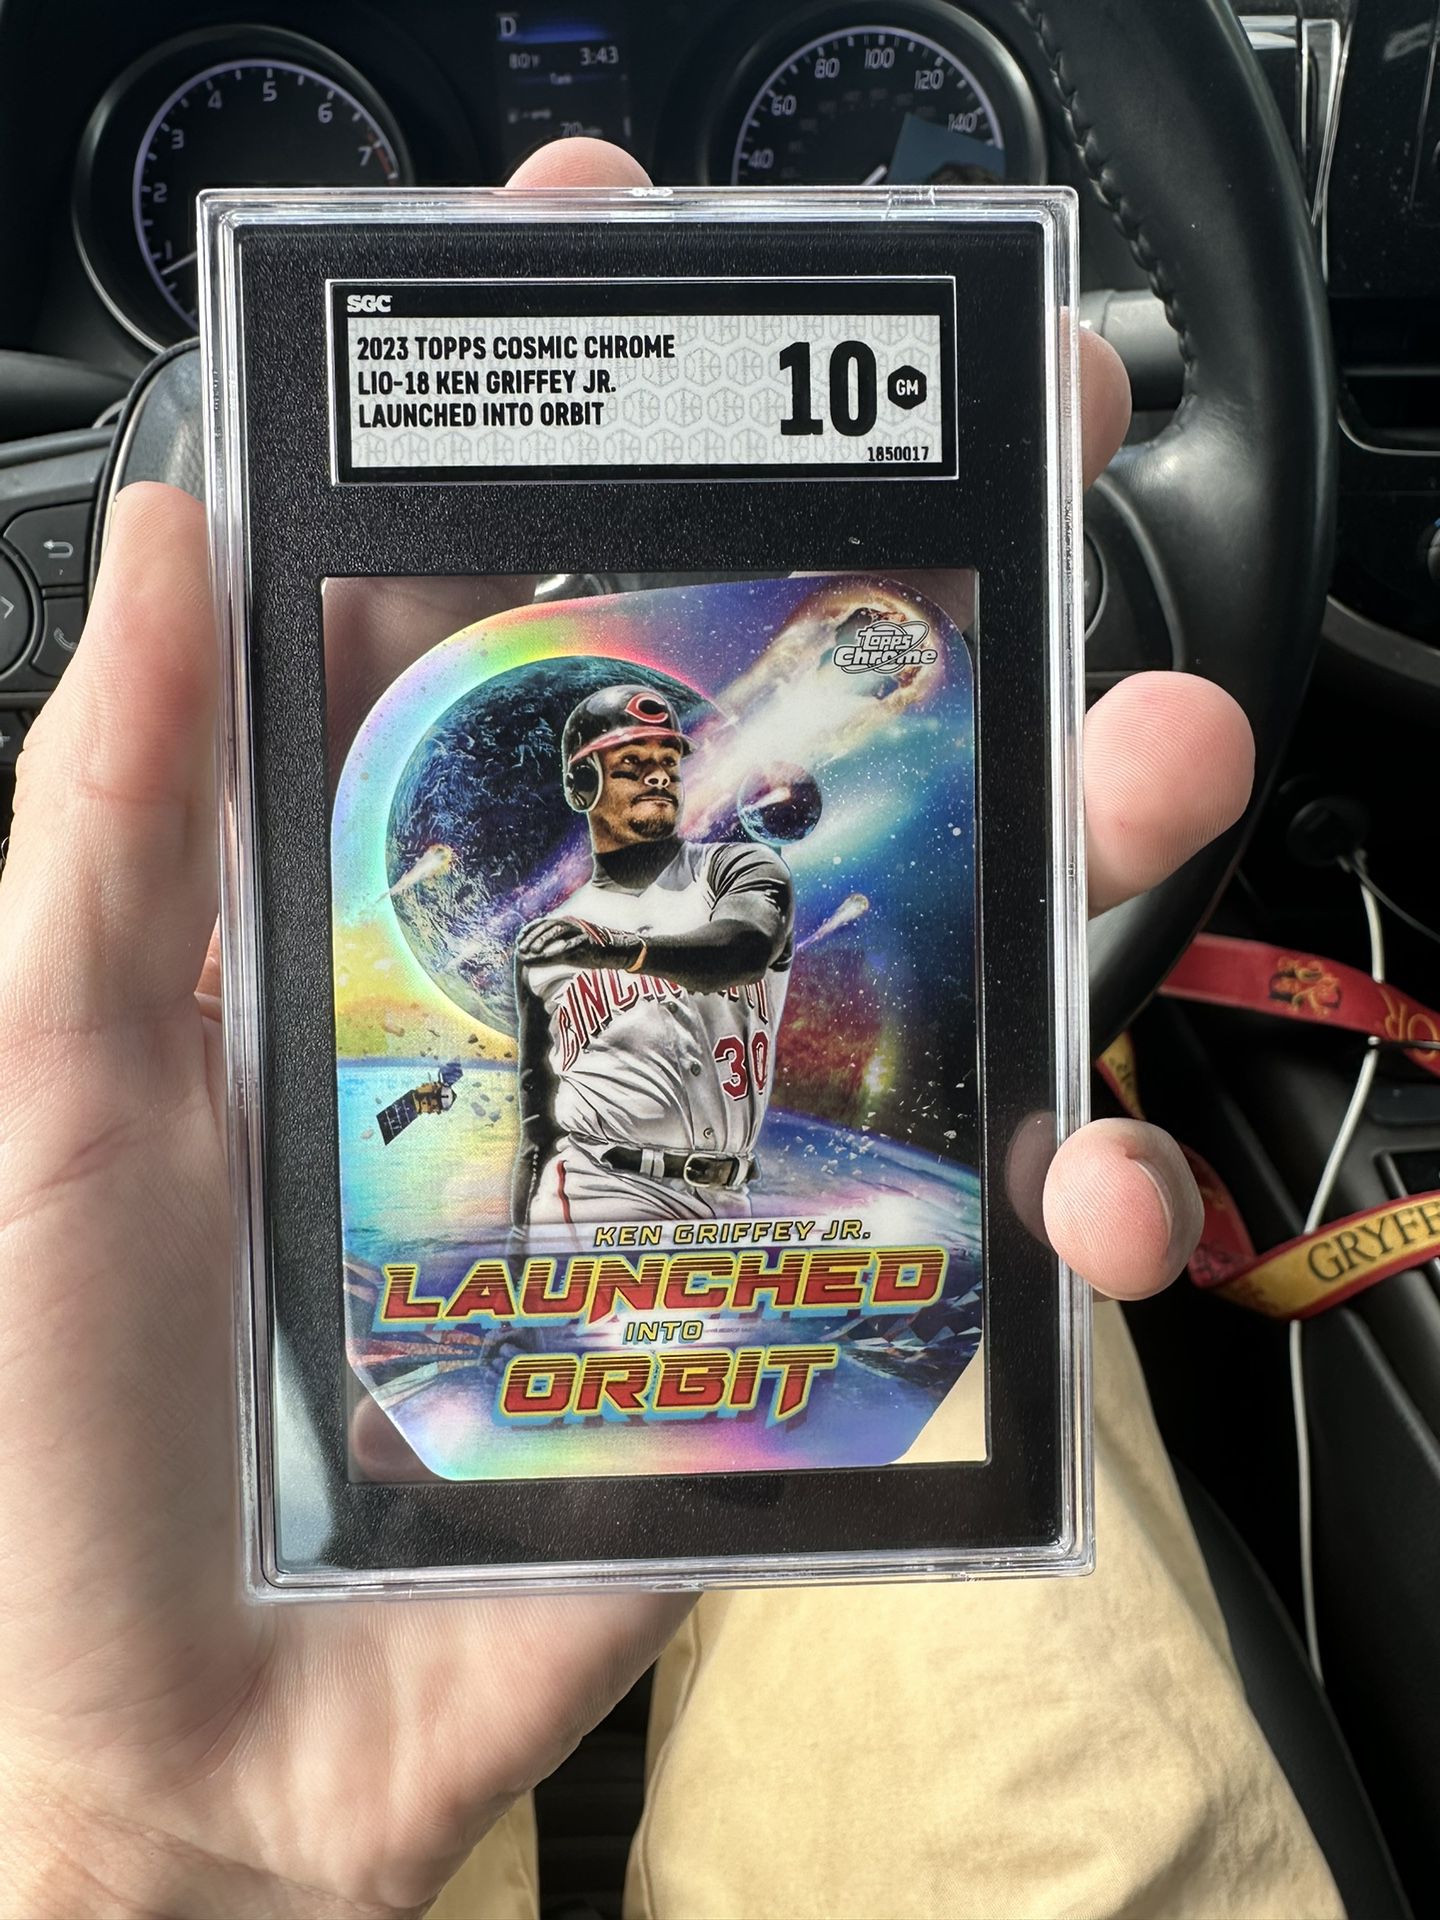 2023 Topps Cosmic Chrome Launched Into Orbit Reds Ken Griffey Jr. 